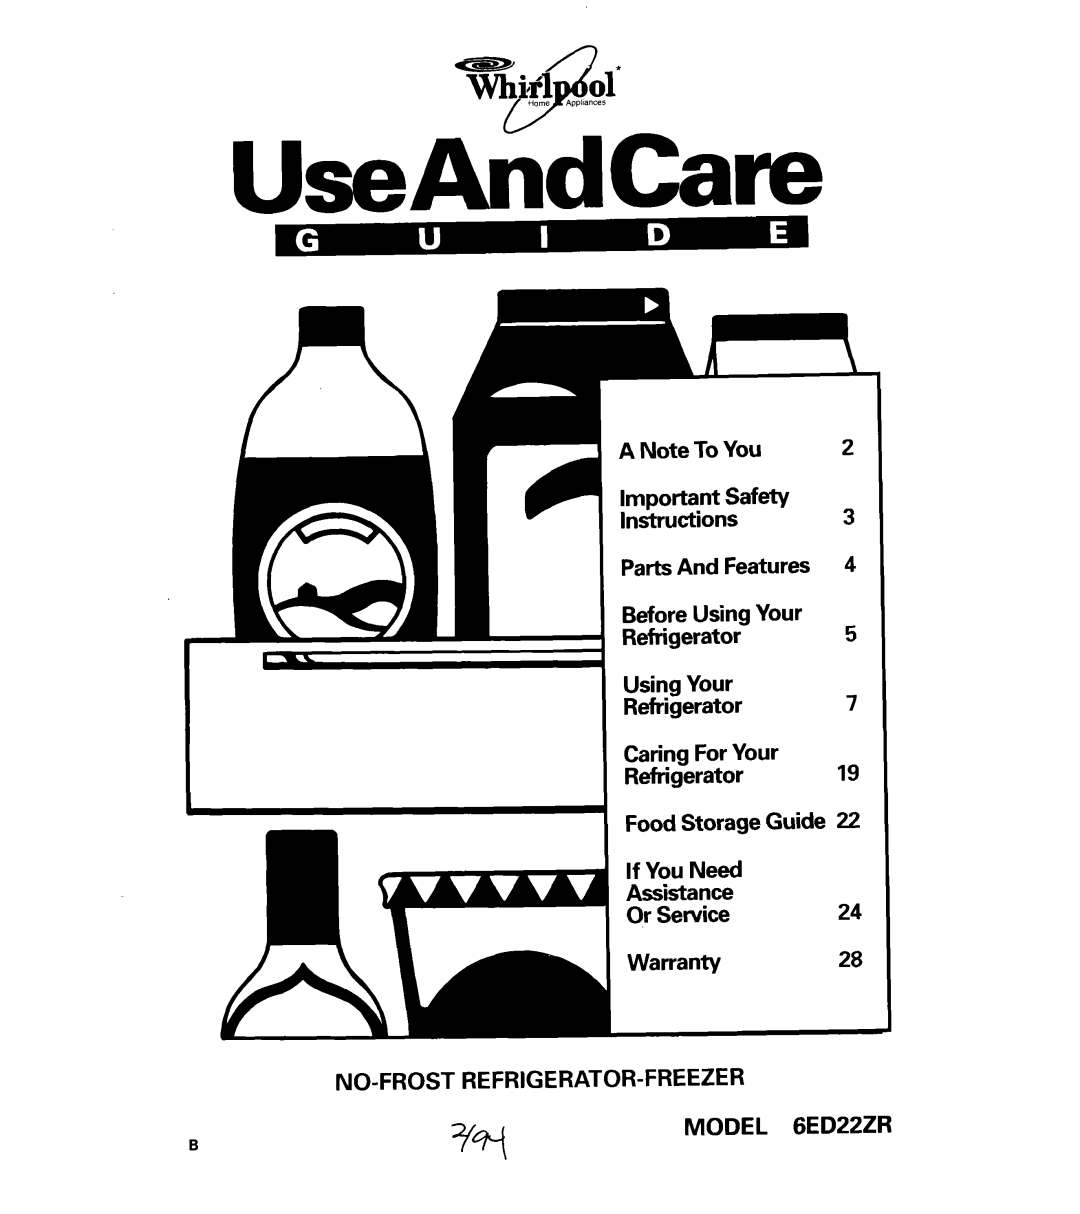 Whirlpool 6ED22ZR important safety instructions UseAndCare, A 01 HOmeAppliances 